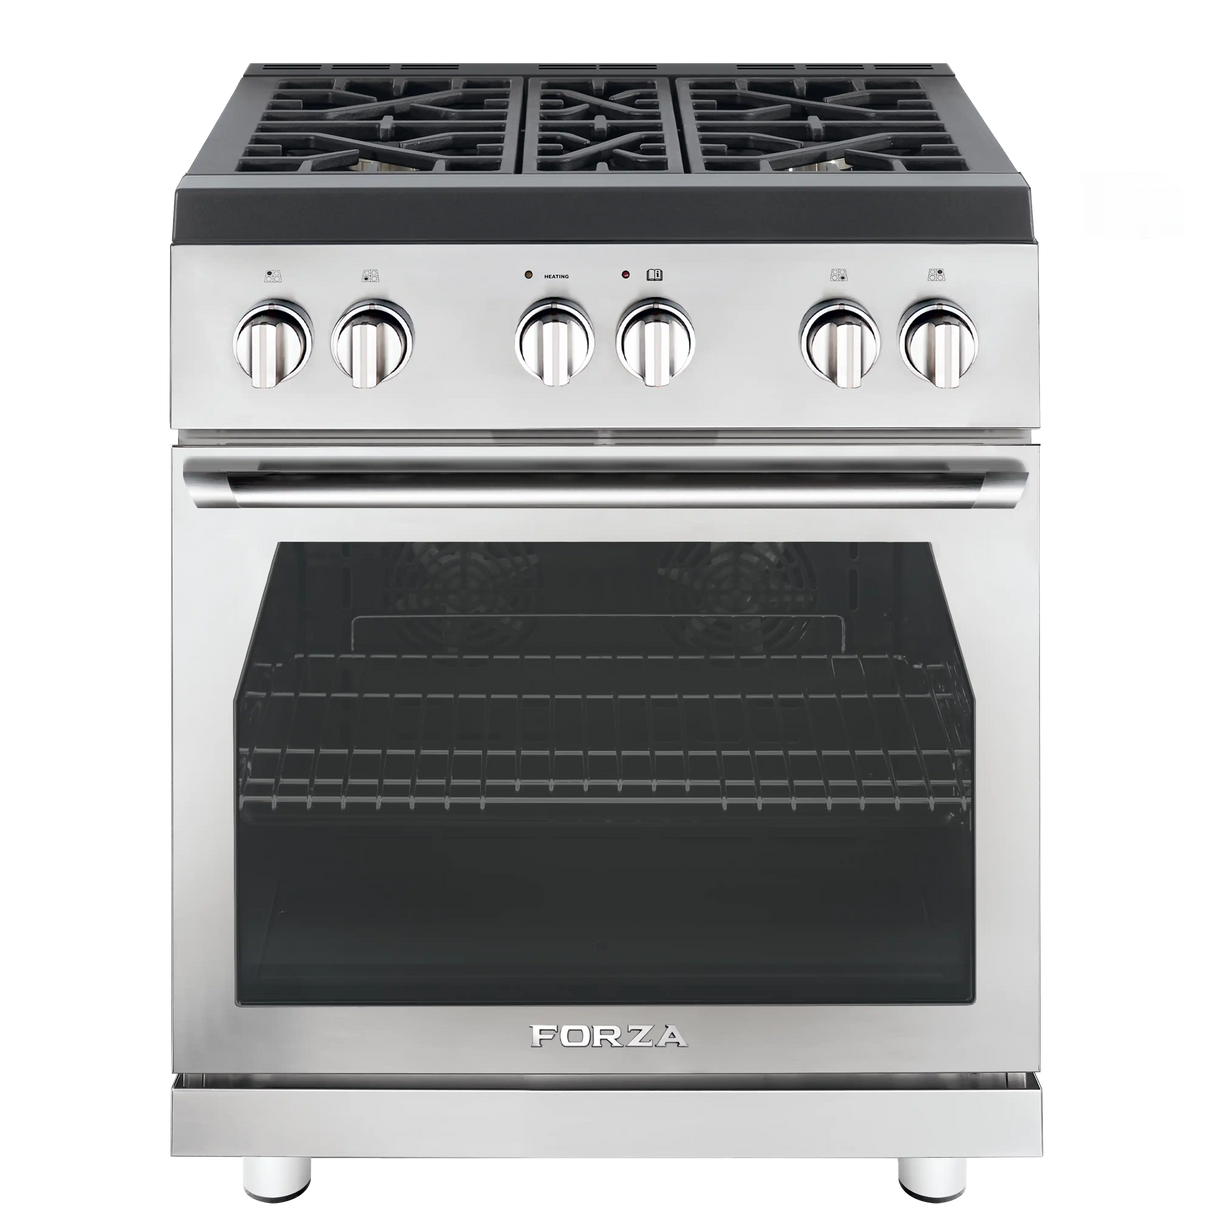 Forza 3-Piece Appliance Package - 30-Inch Gas Range, 11-Inch Pro-Style Under Cabinet Range Hood, & 24-Inch Dishwasher in Stainless Steel